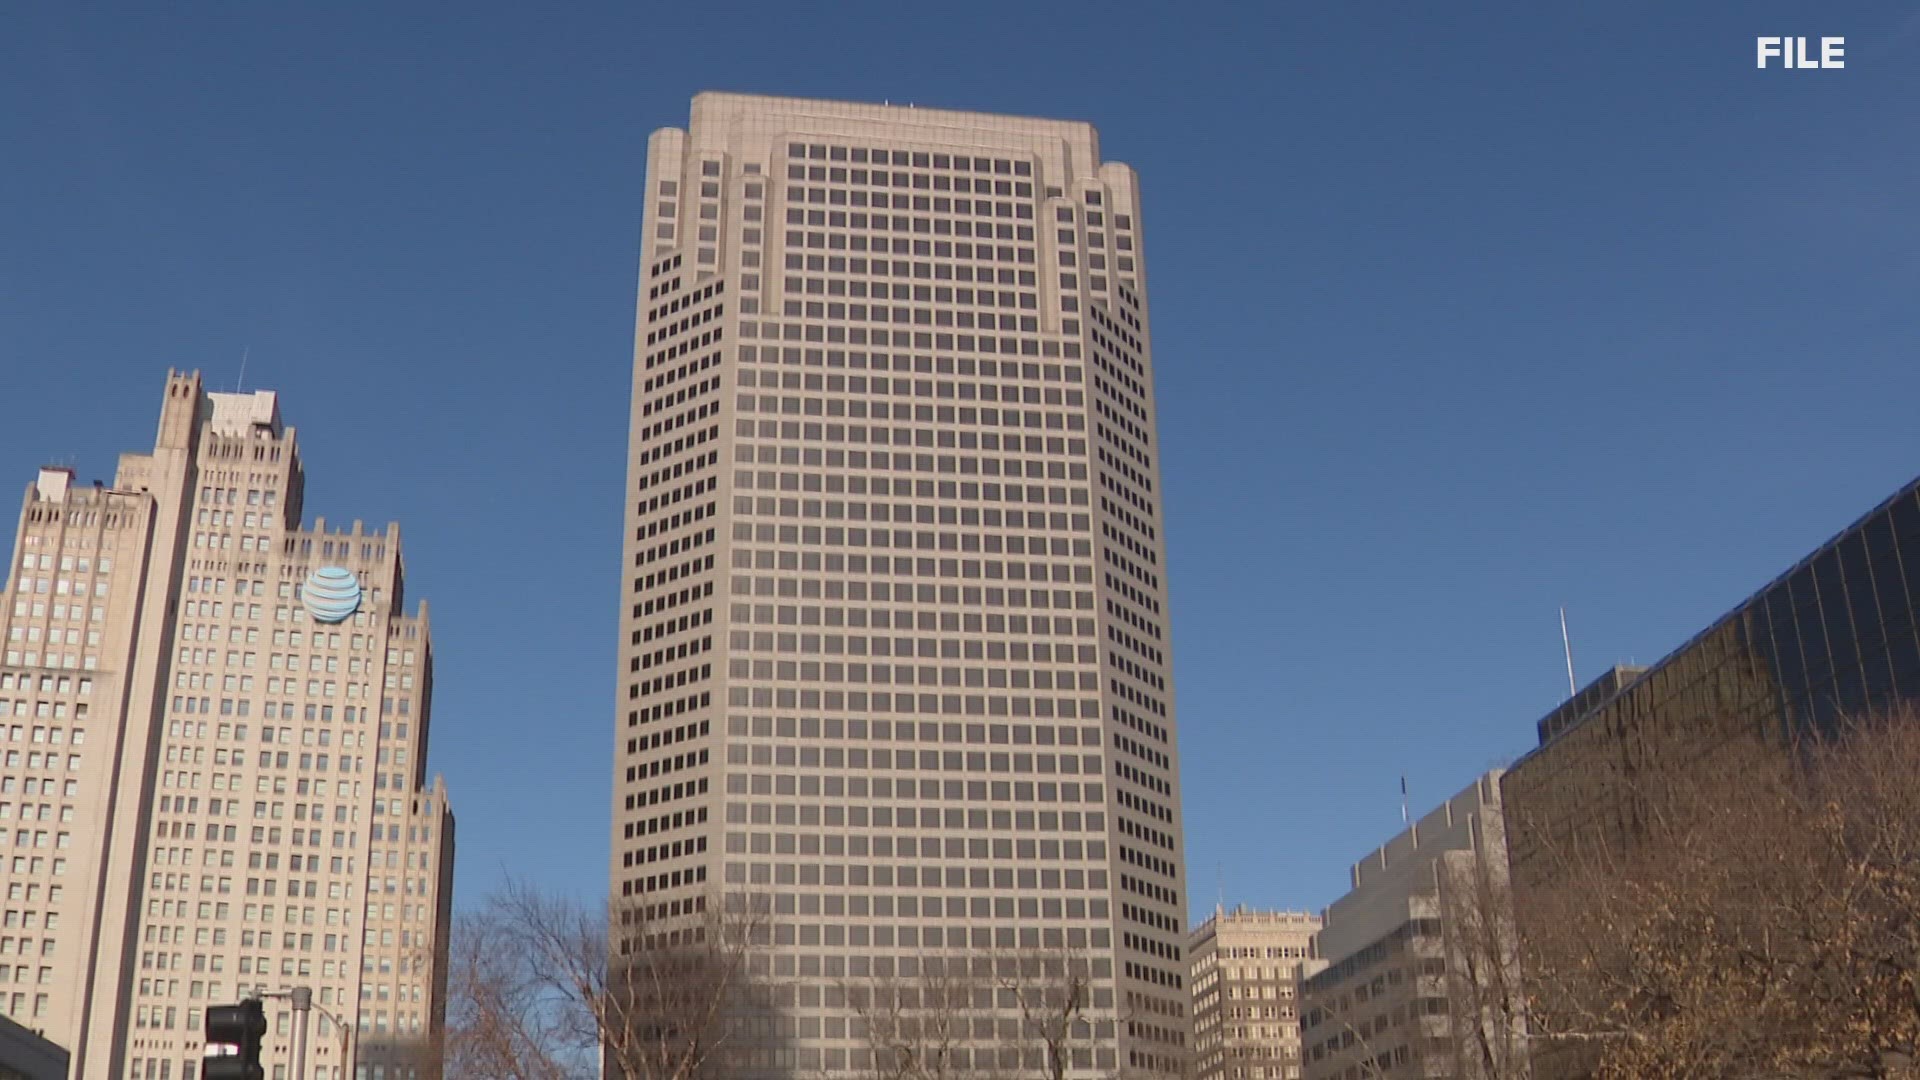 St. Louis' largest skyscraper has a new owner. The 44-story building has sat vacant since 2017.